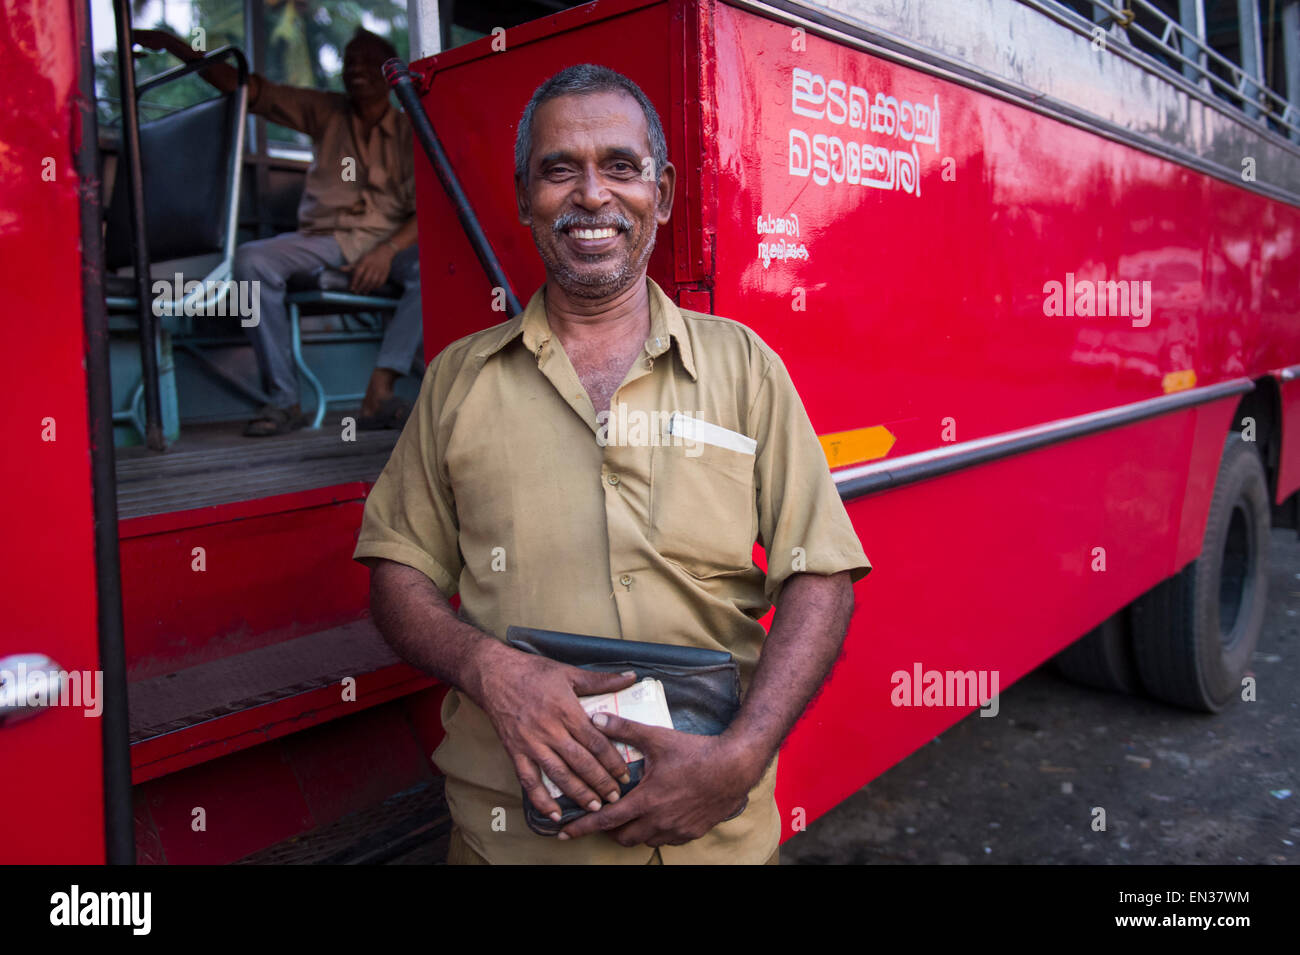 Bus driver in front of a red bus, Kerala, India Stock Photo